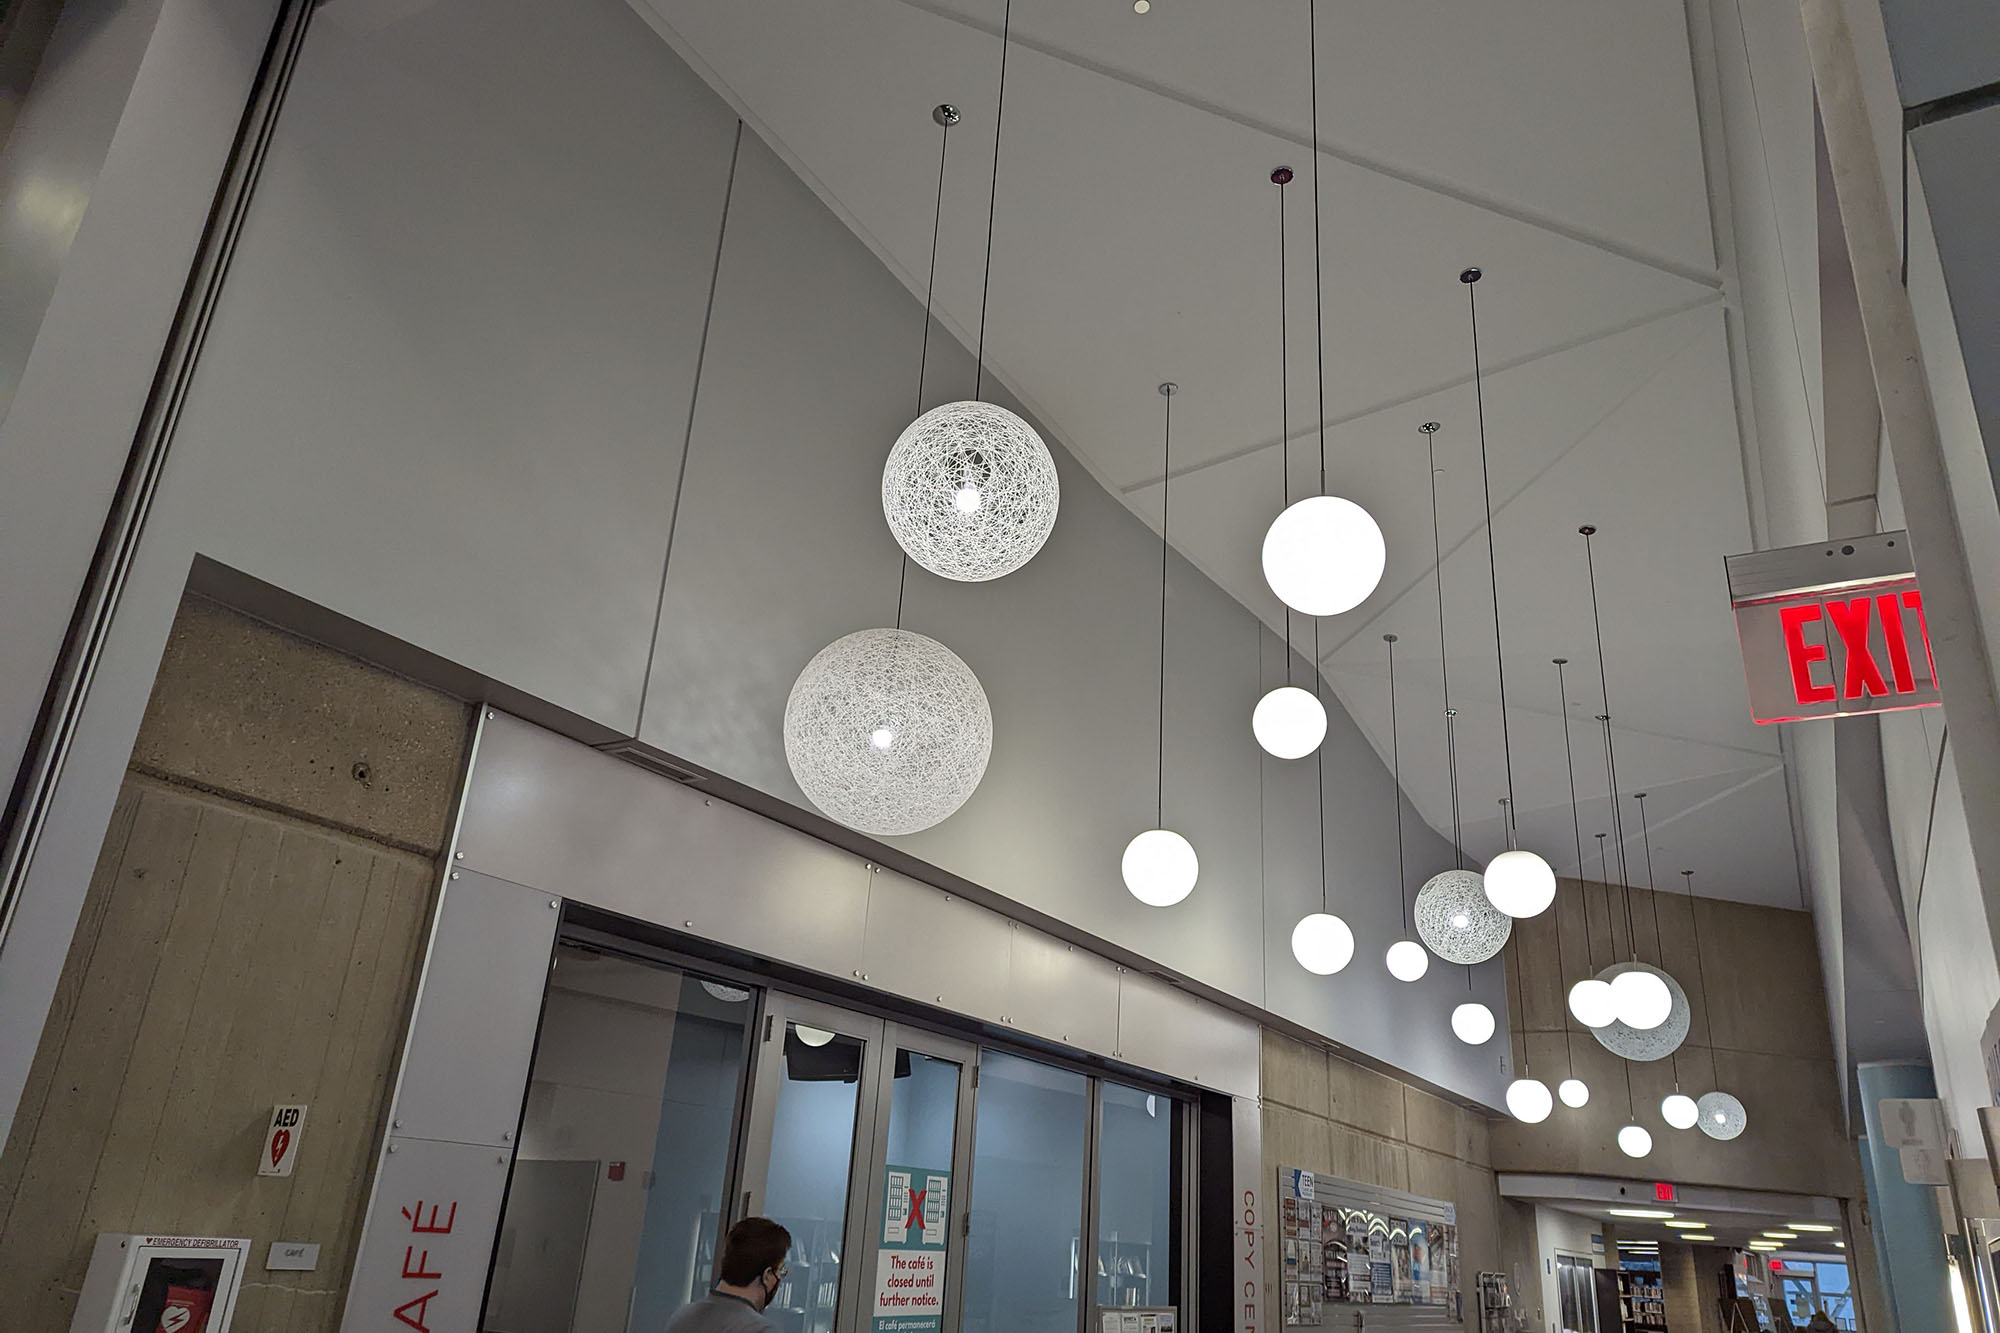 This is a sample photo of a light fixture from the main camera of the Pixel 6.